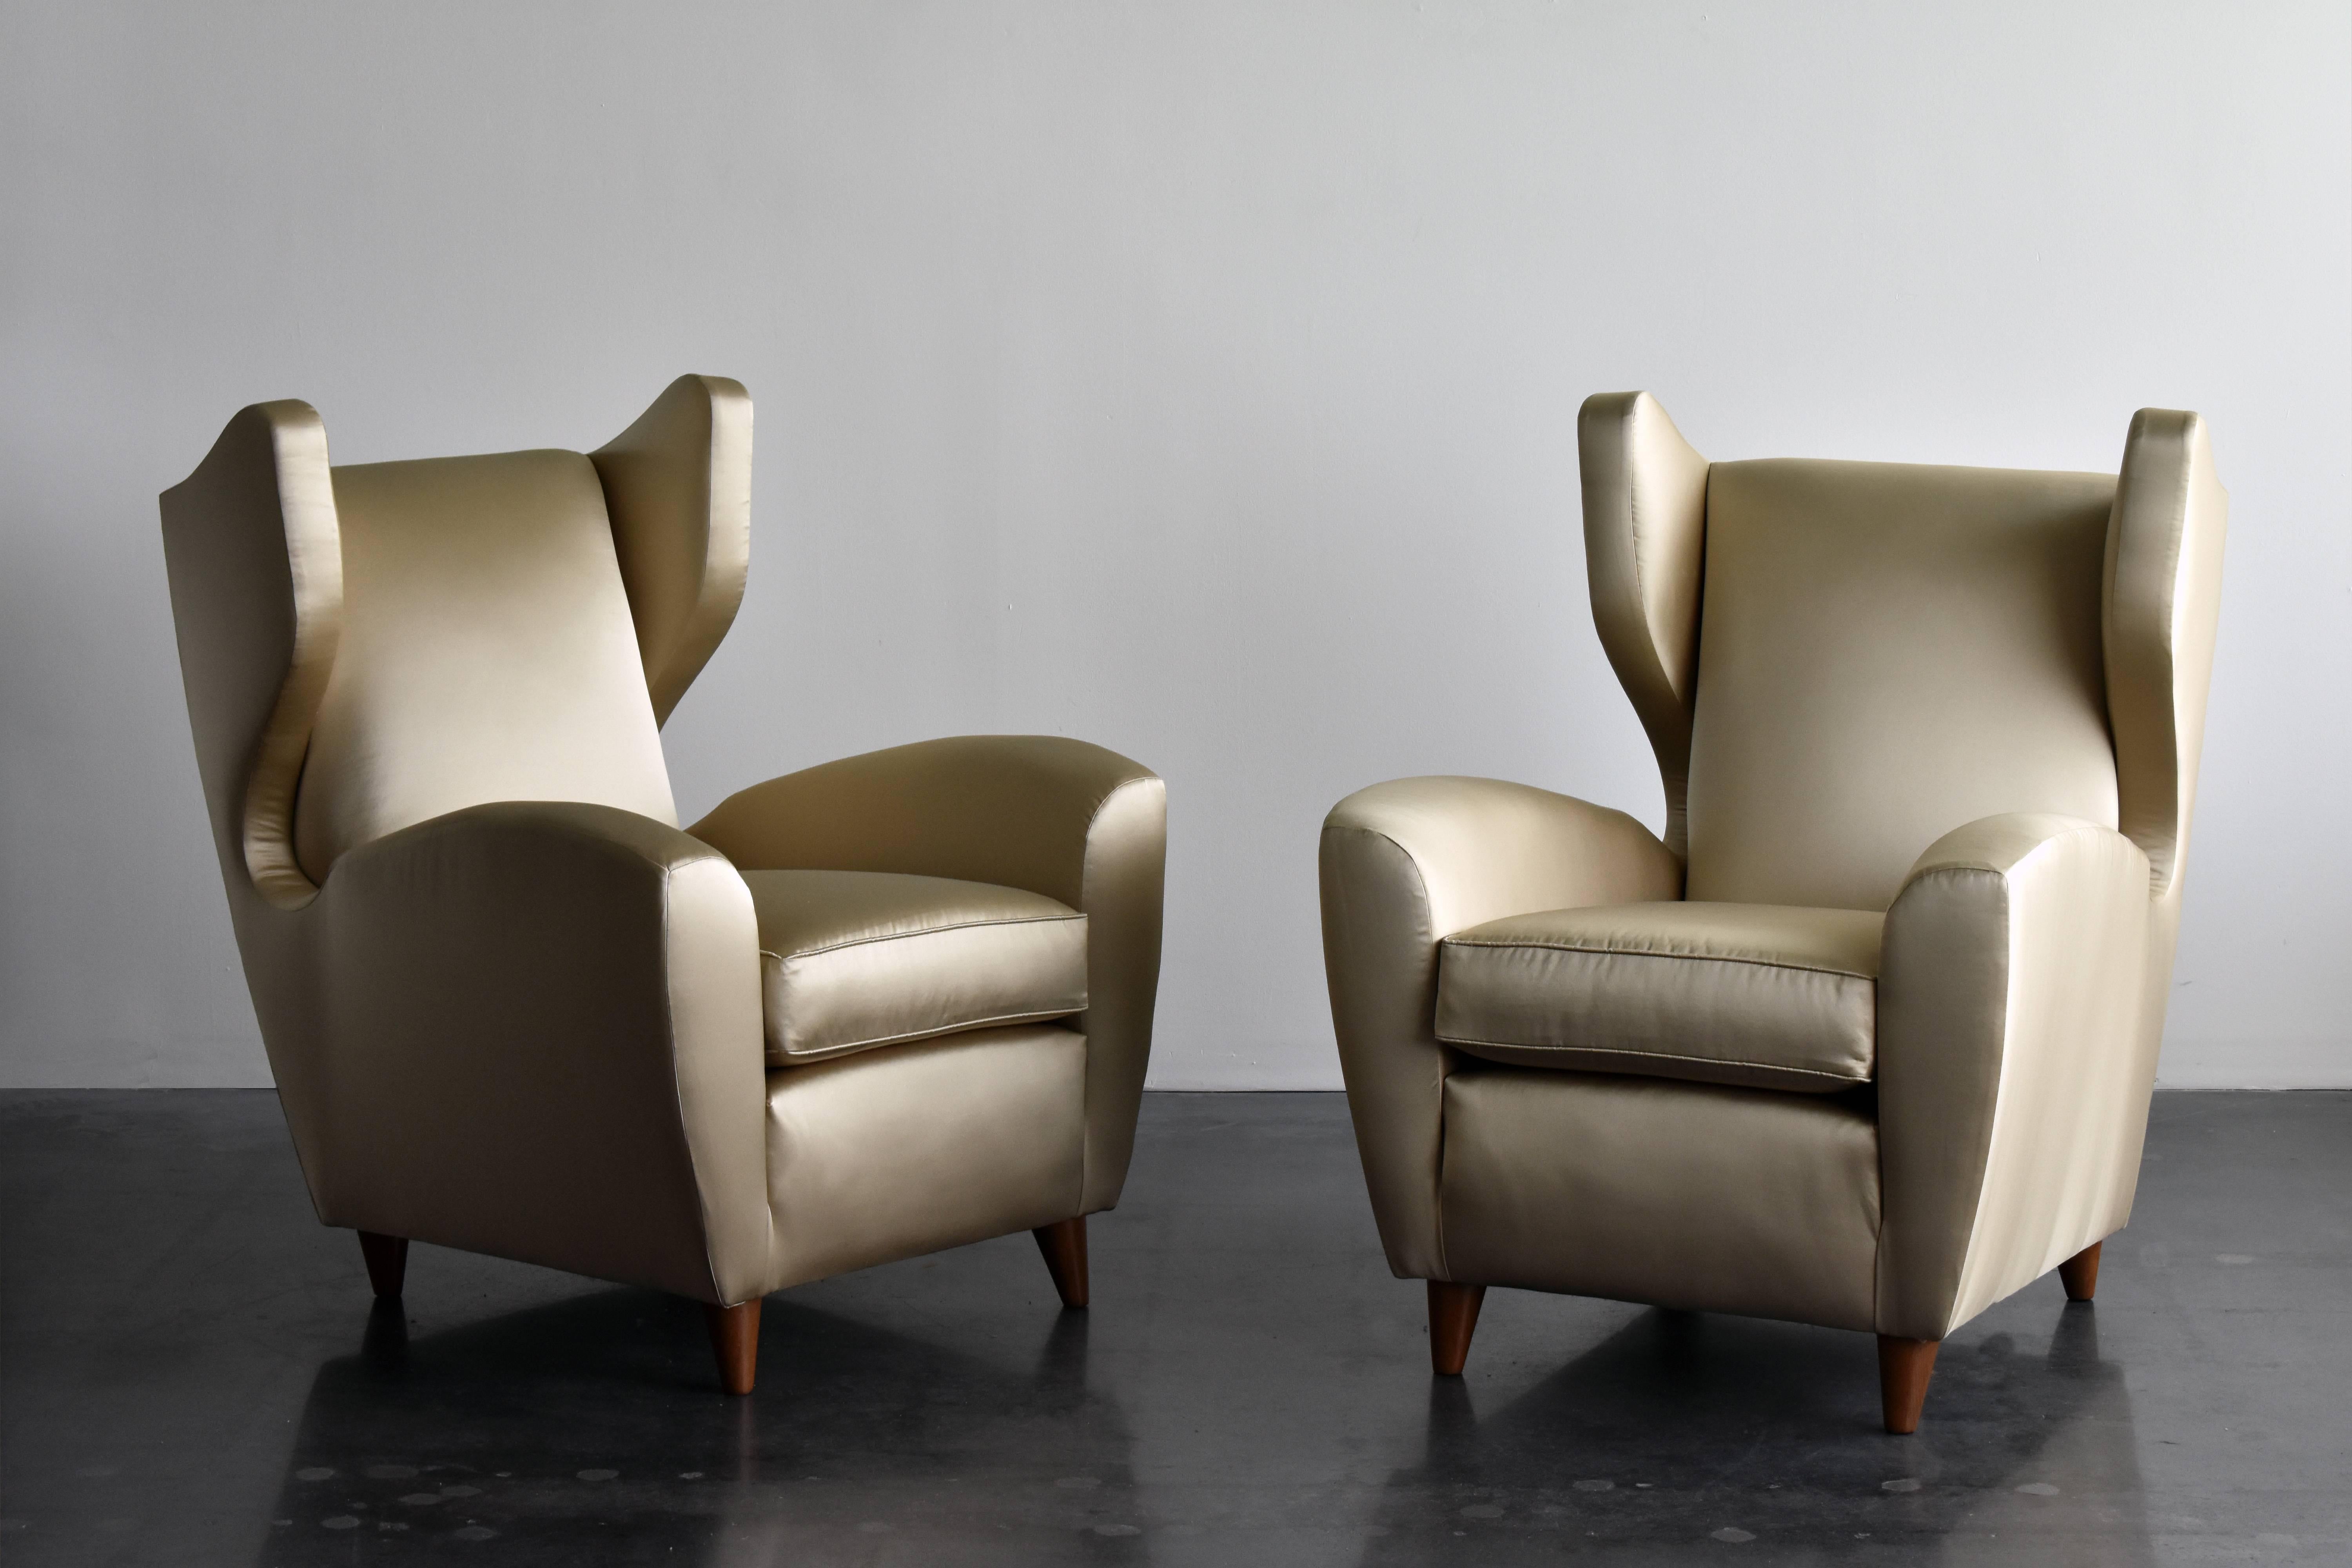 A pair of organic lounge / wingback / high back chairs designed and produced by Italian architect Melchiorre Bega. wooden legs, upholstered in brand new light gold / bronze metallic satin fabric. 

Melchiorre Bega is considered one of Italy's most